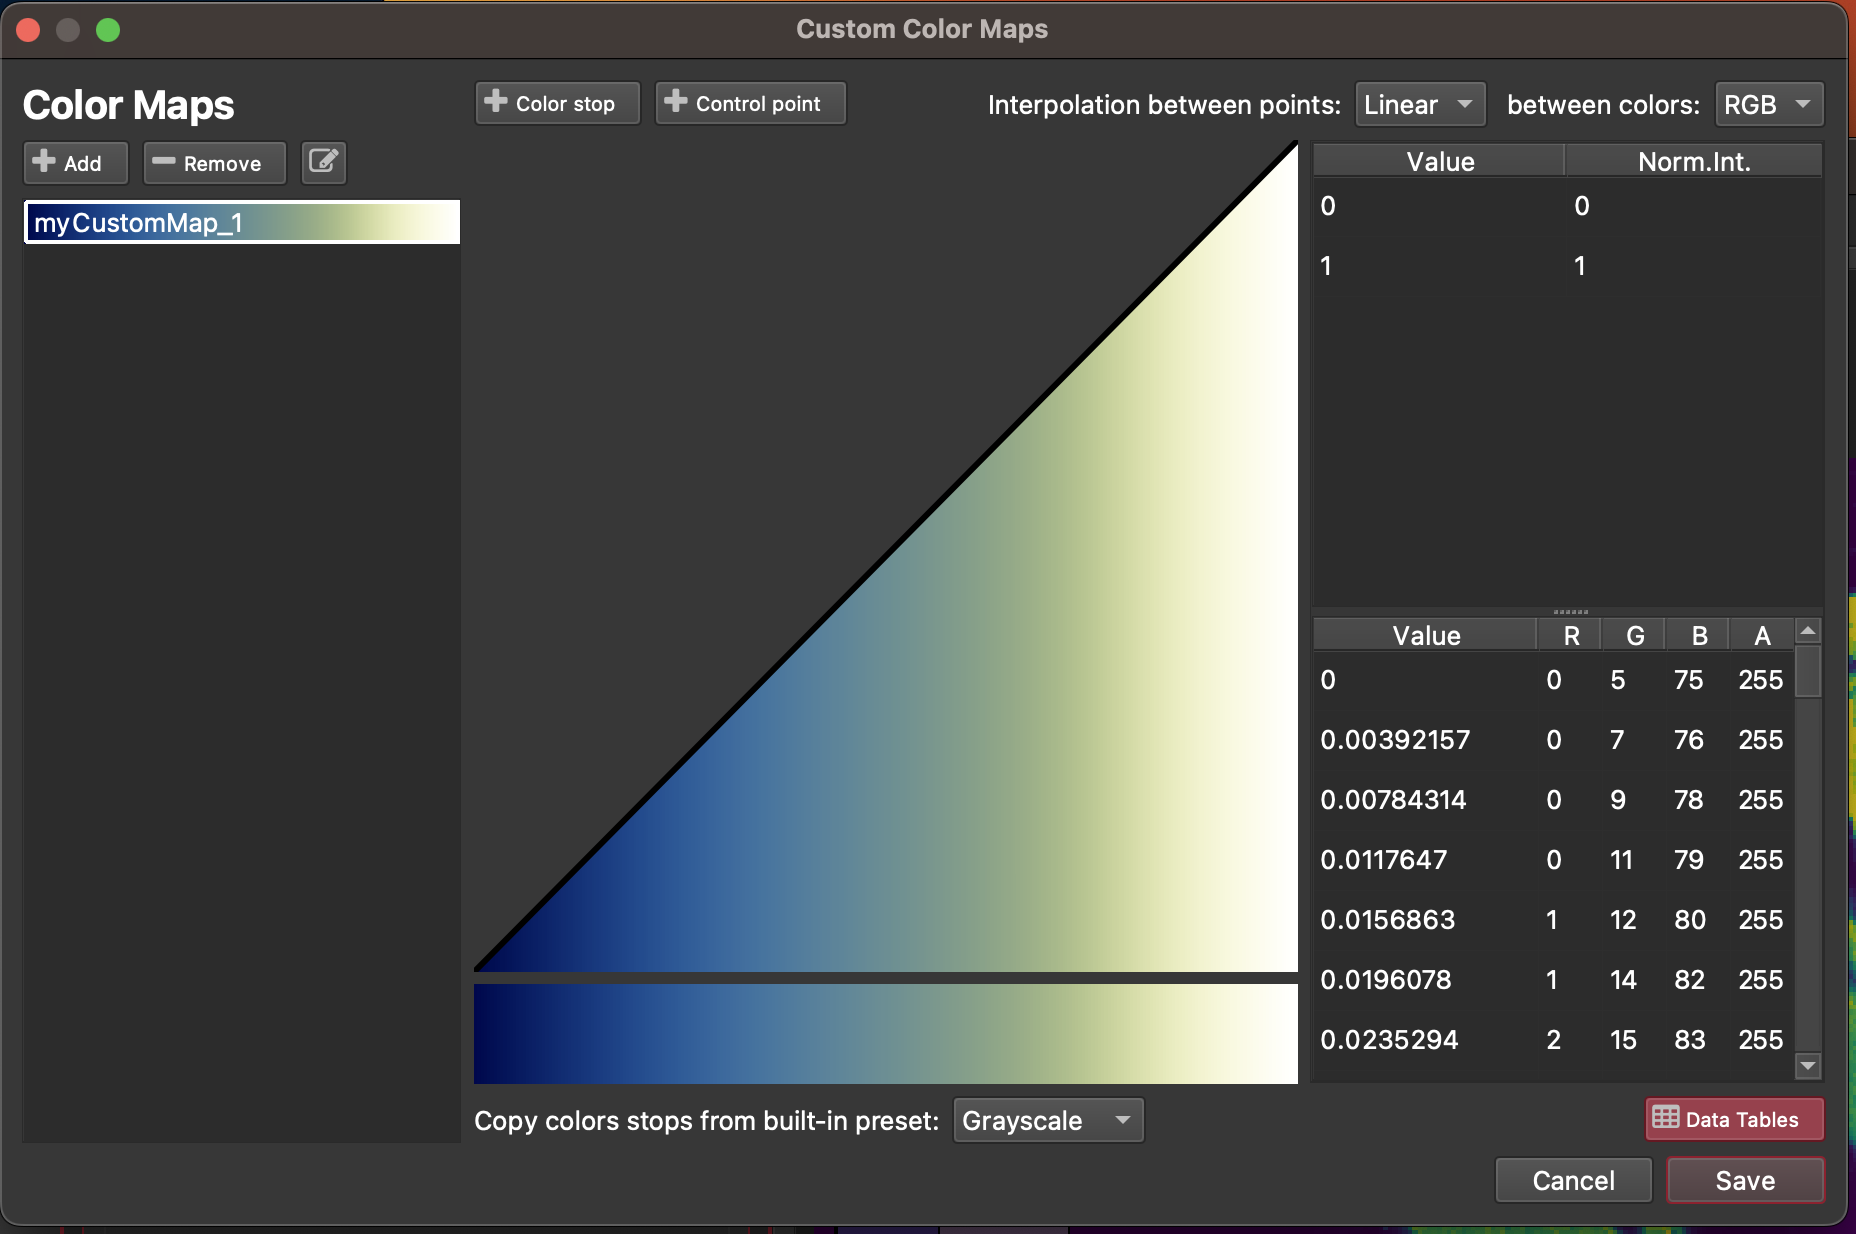 A screenshot of the Custom Color Maps tool in iolite